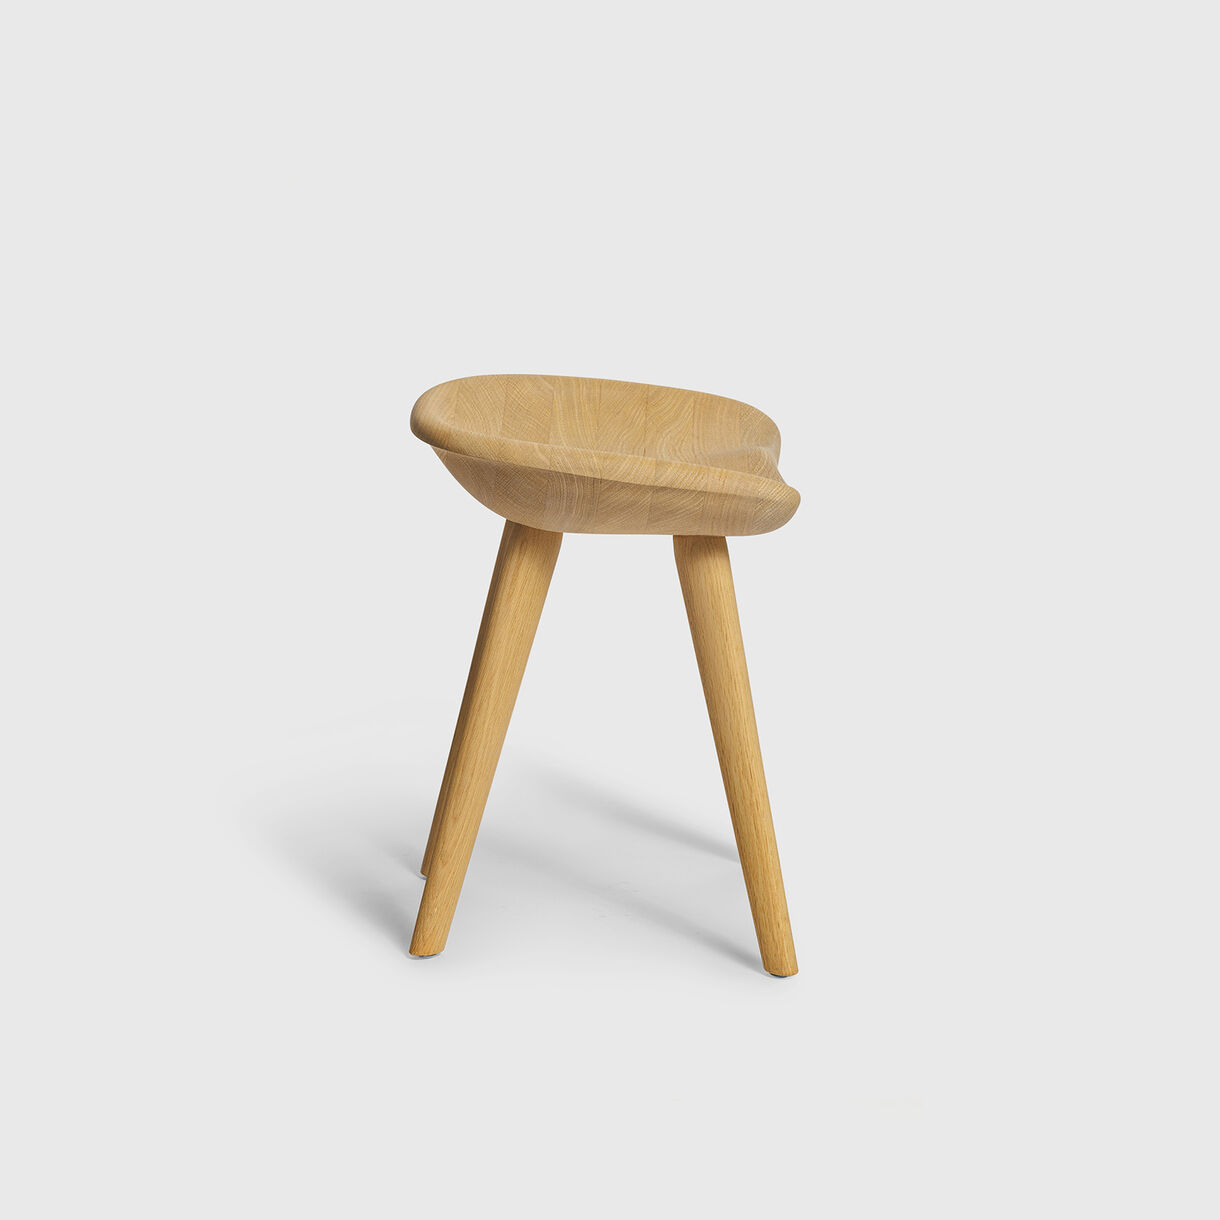 Tractor Stool, Low Stool Height, White Oak